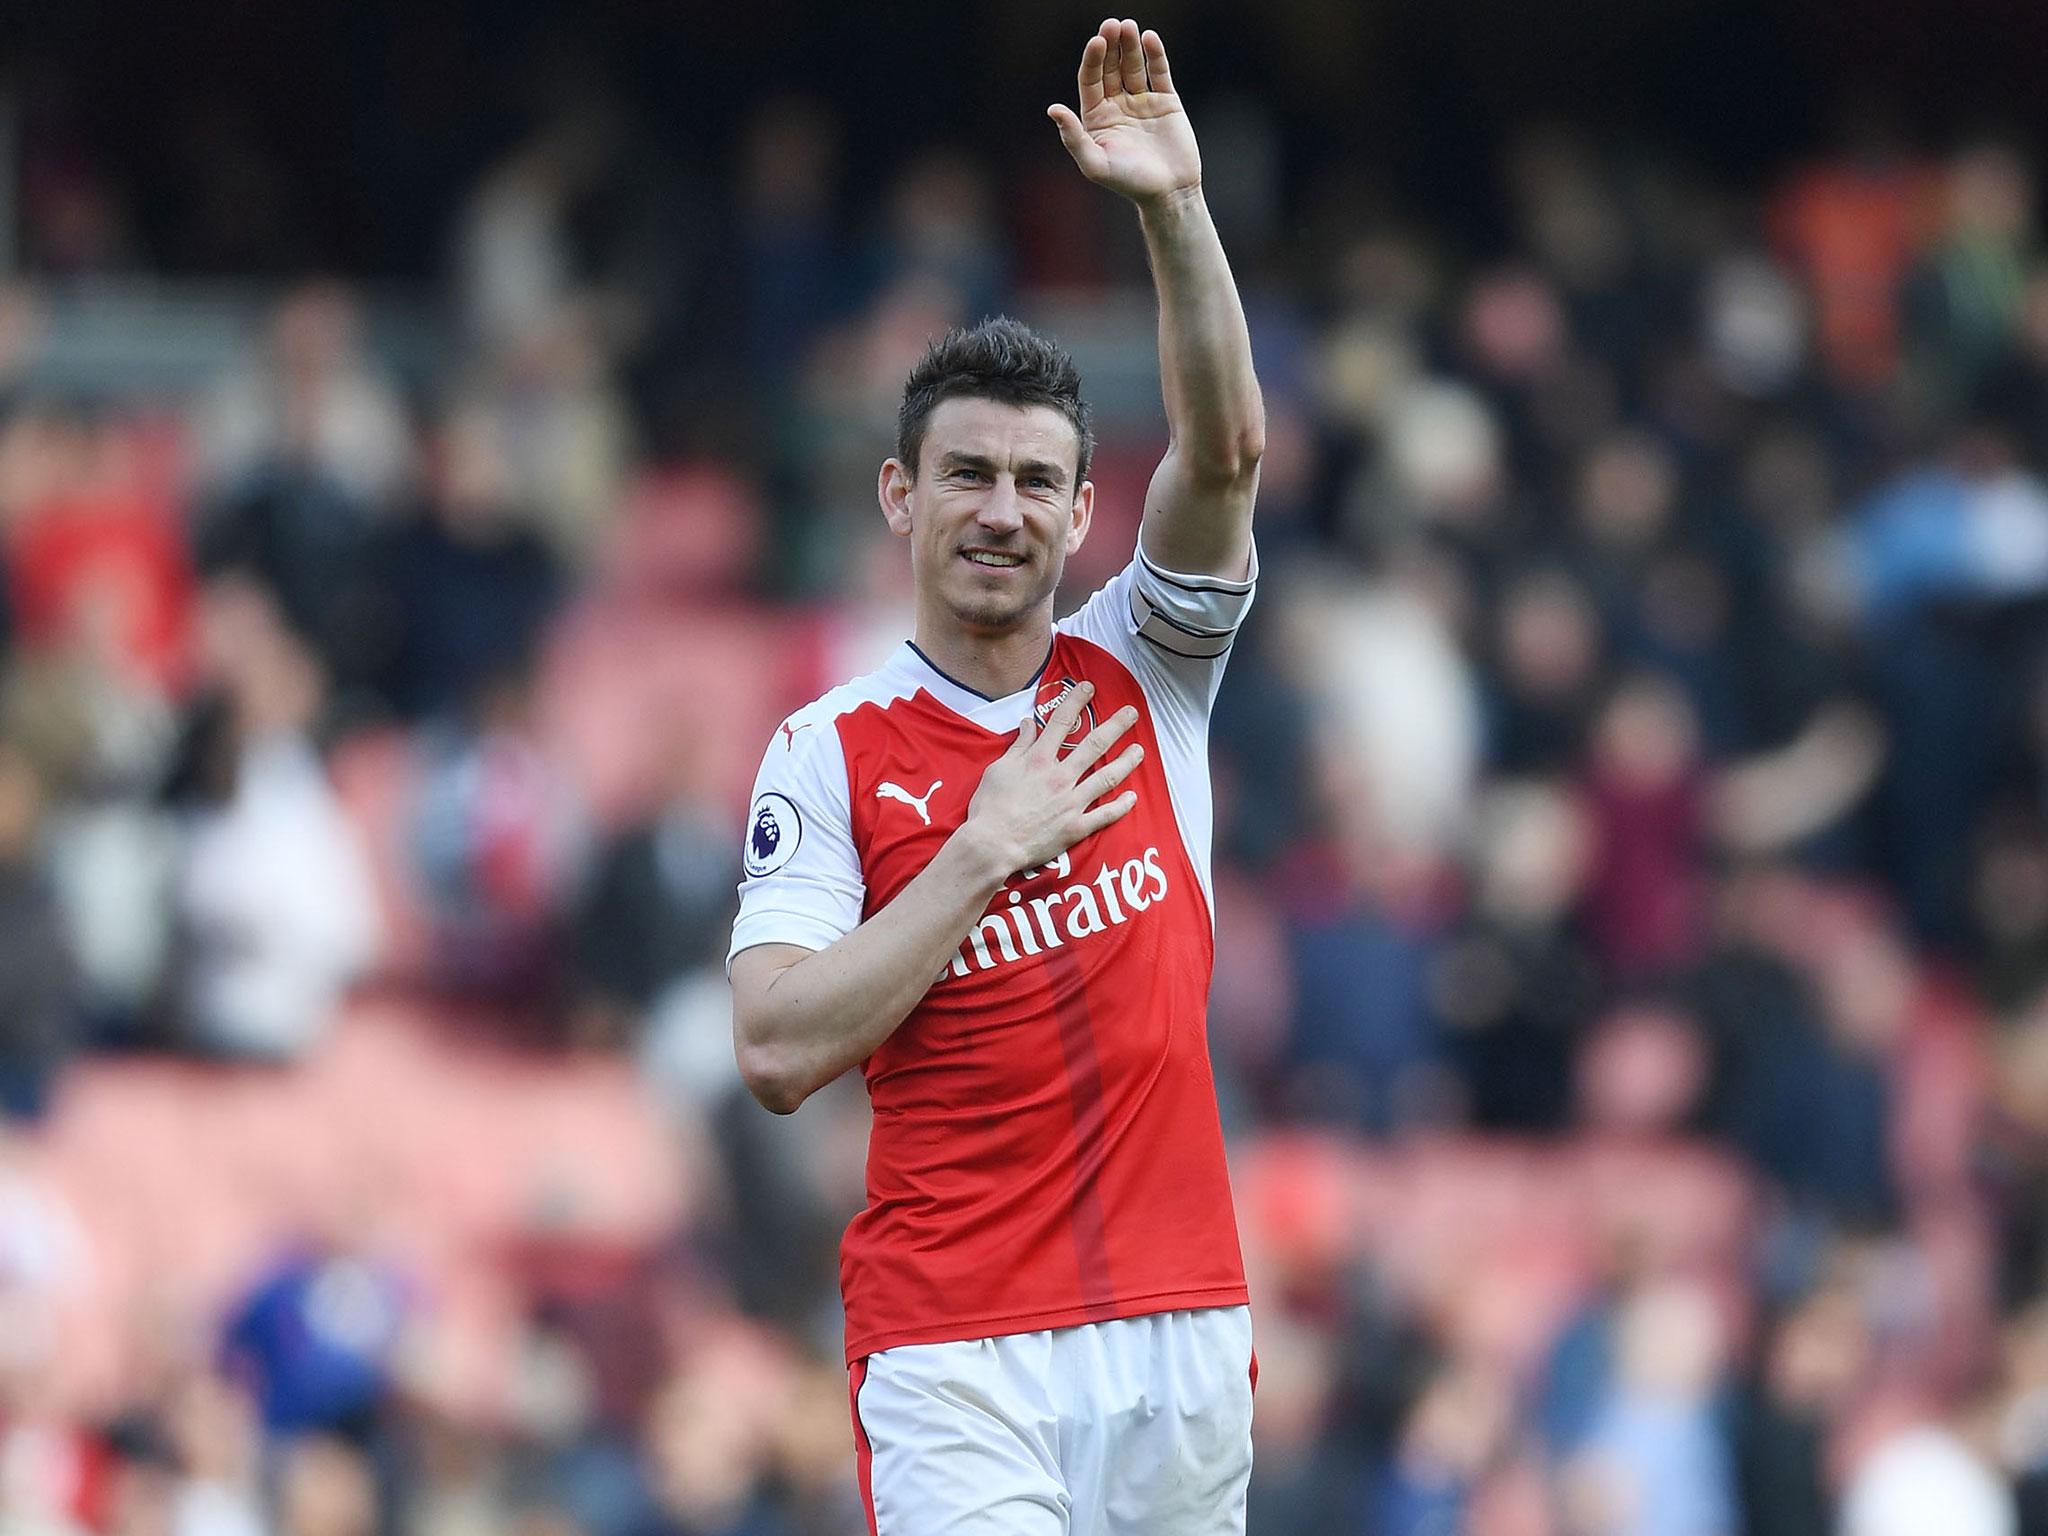 Laurent Koscielny is an injury doubt for Arsenal's trip to Southampton on Wednesday